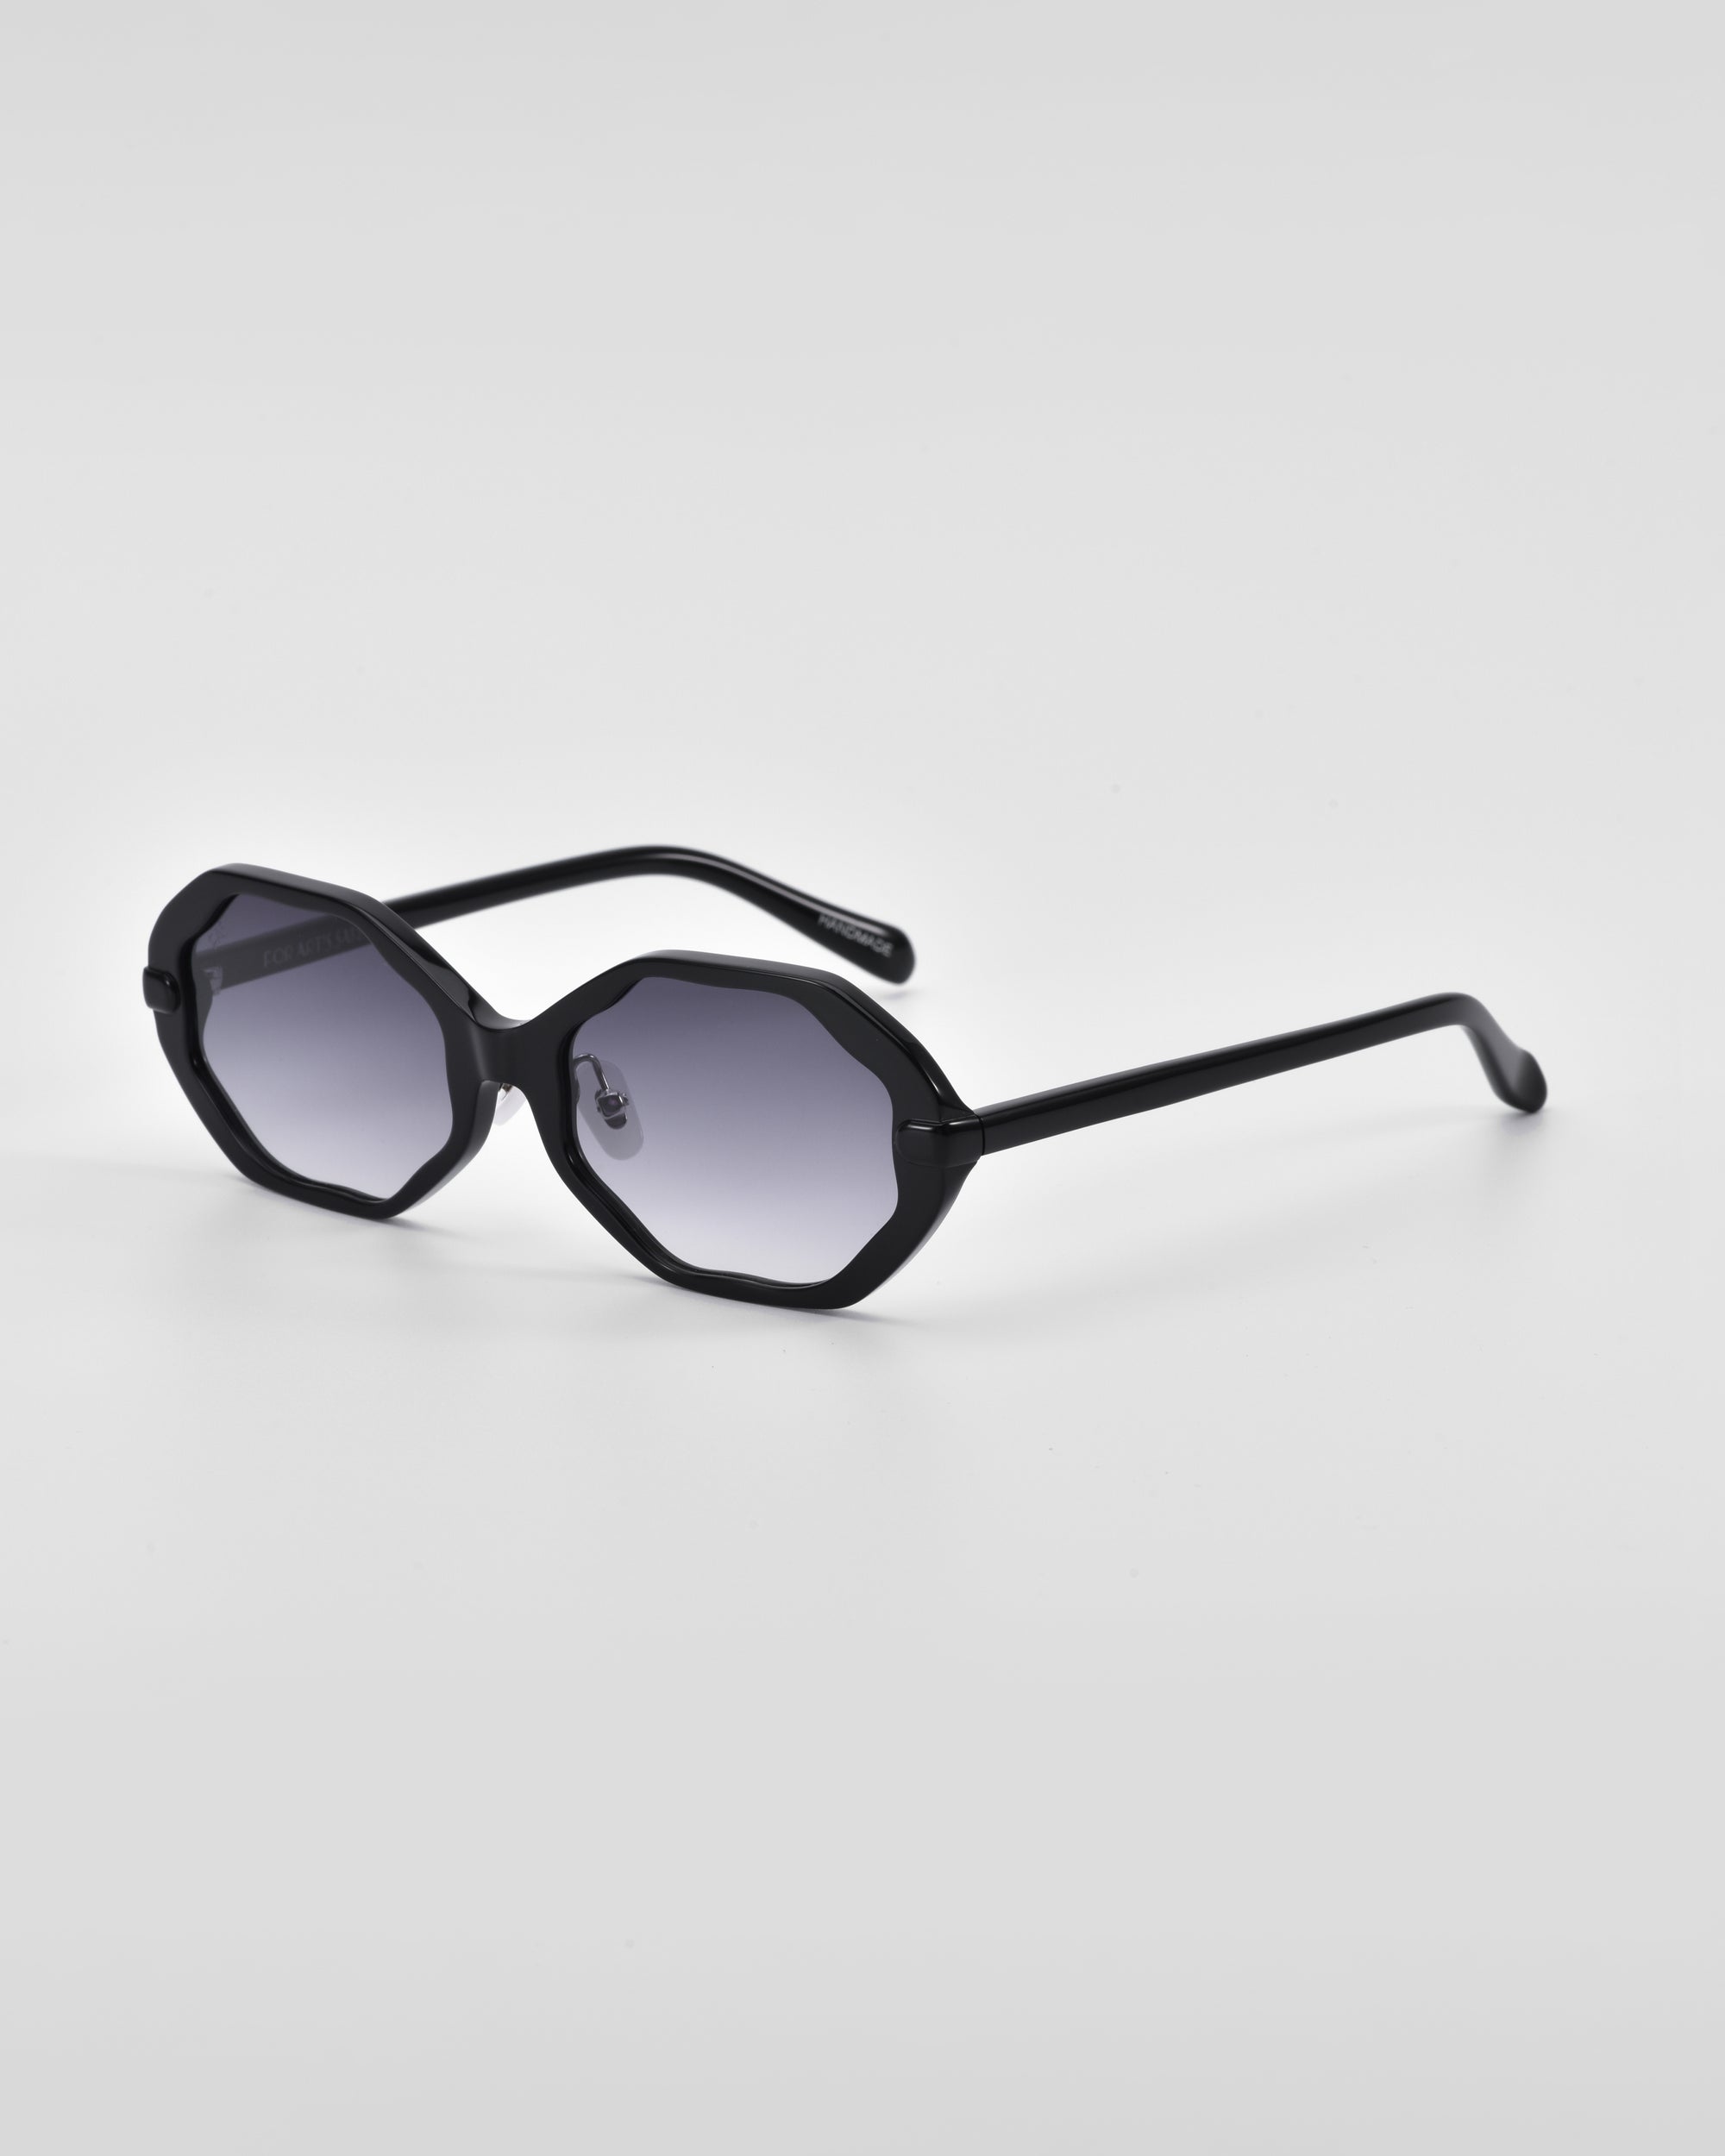 A pair of black octagonal sunglasses with dark tinted lenses is displayed against a plain white background. The For Art&#39;s Sake® Lotus sunglasses feature a modern geometric design, sleek temples, and jade-stone nose pads for added elegance.